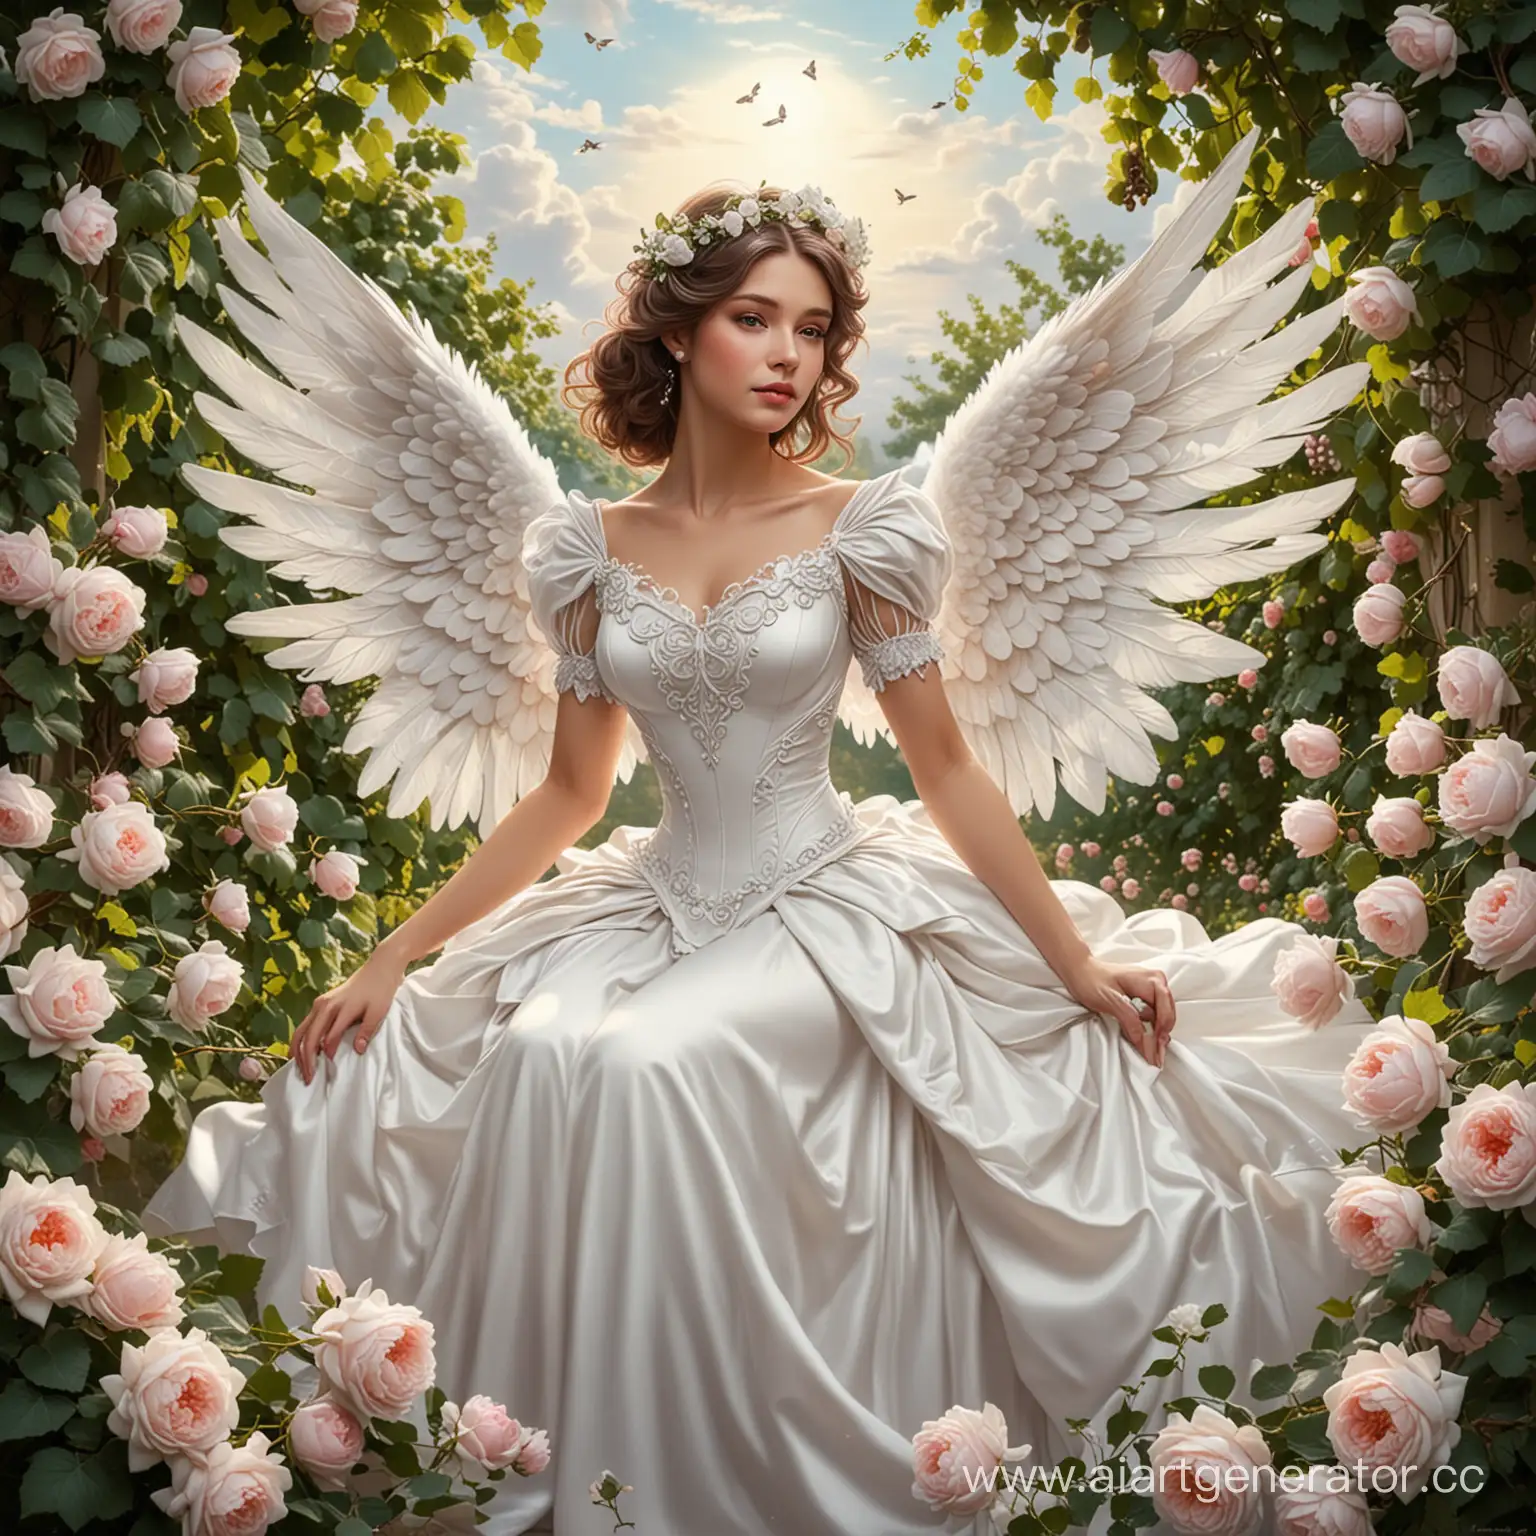 Alphonse-the-Fly-Angel-Girl-Surrounded-by-Grapes-Roses-in-White-Ball-Gown